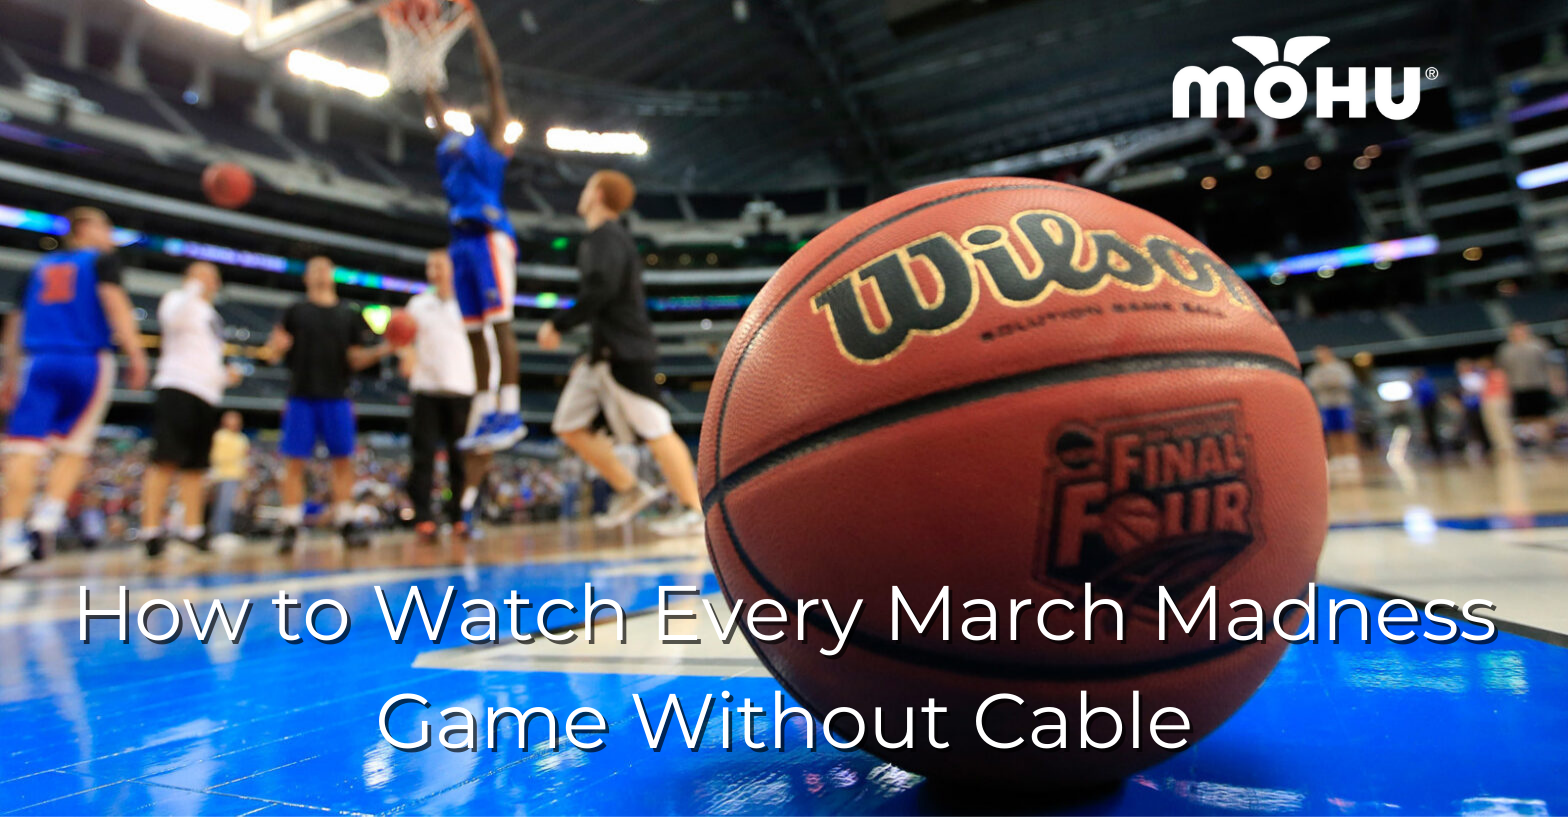 basketball sitting on court with players in the background, How to Watch Every March Madness Game Without Cable, with Mohu logo